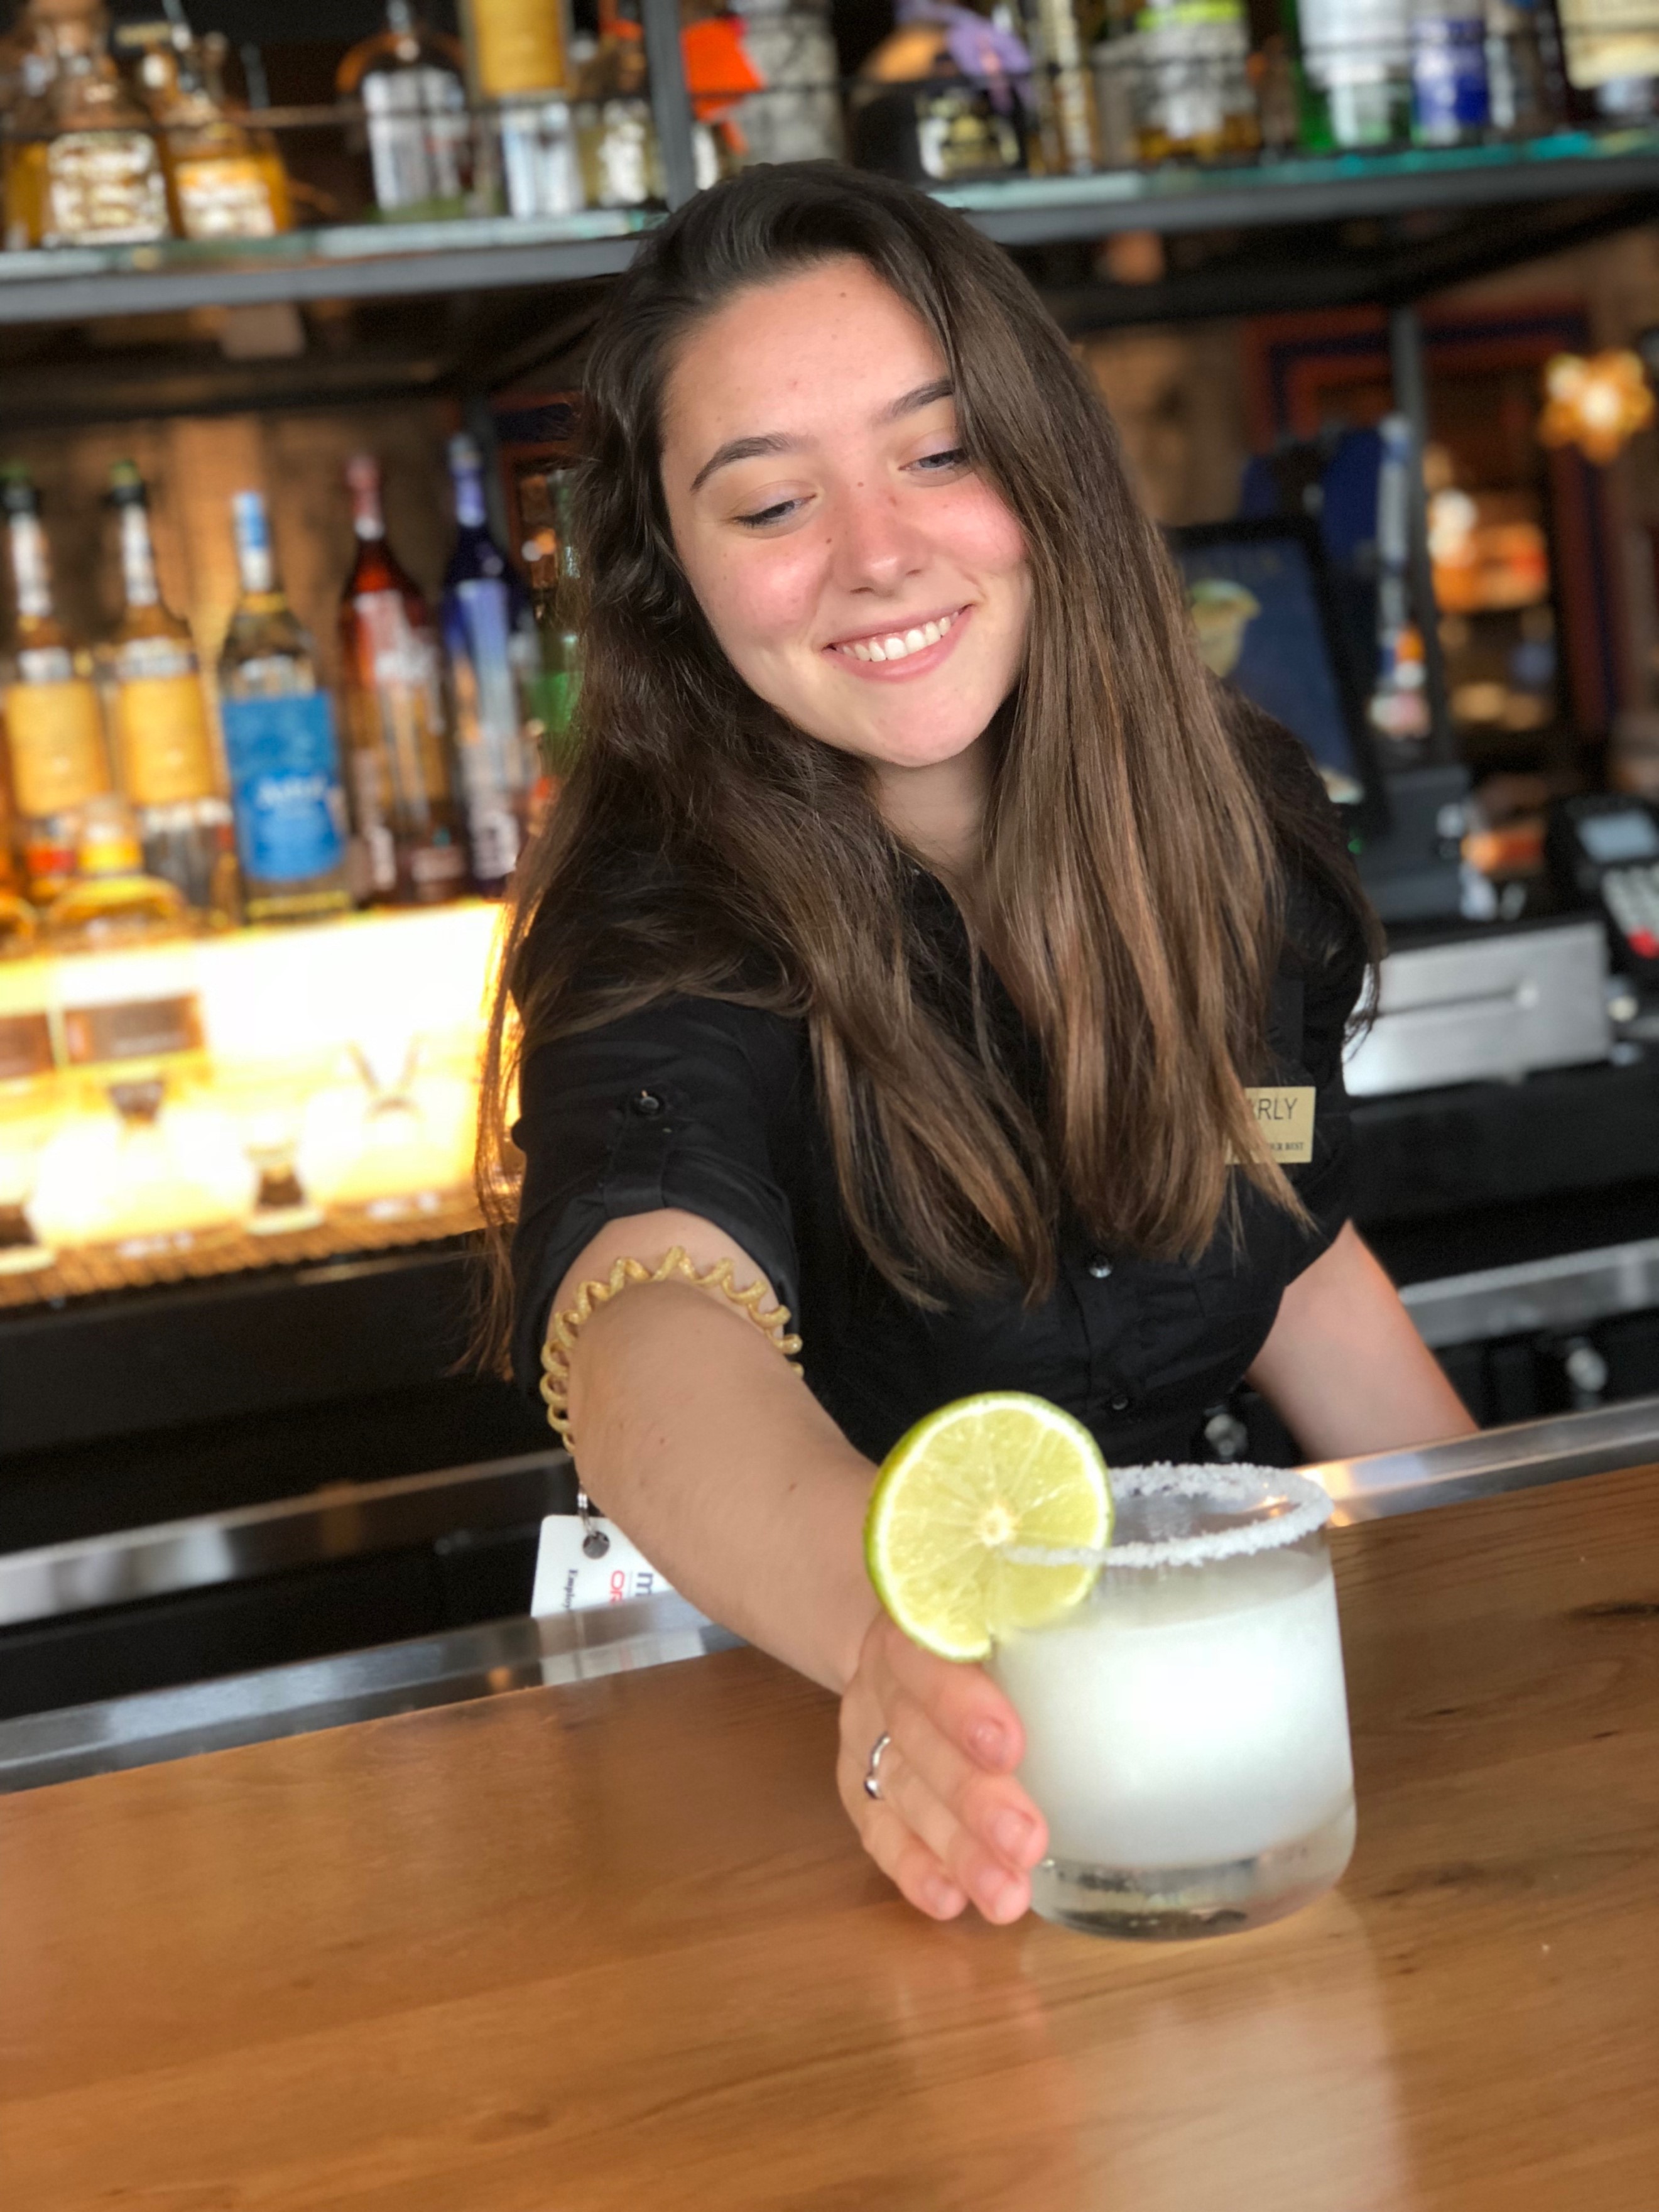 Employee preparing a drink at the Blue Delia restaurant